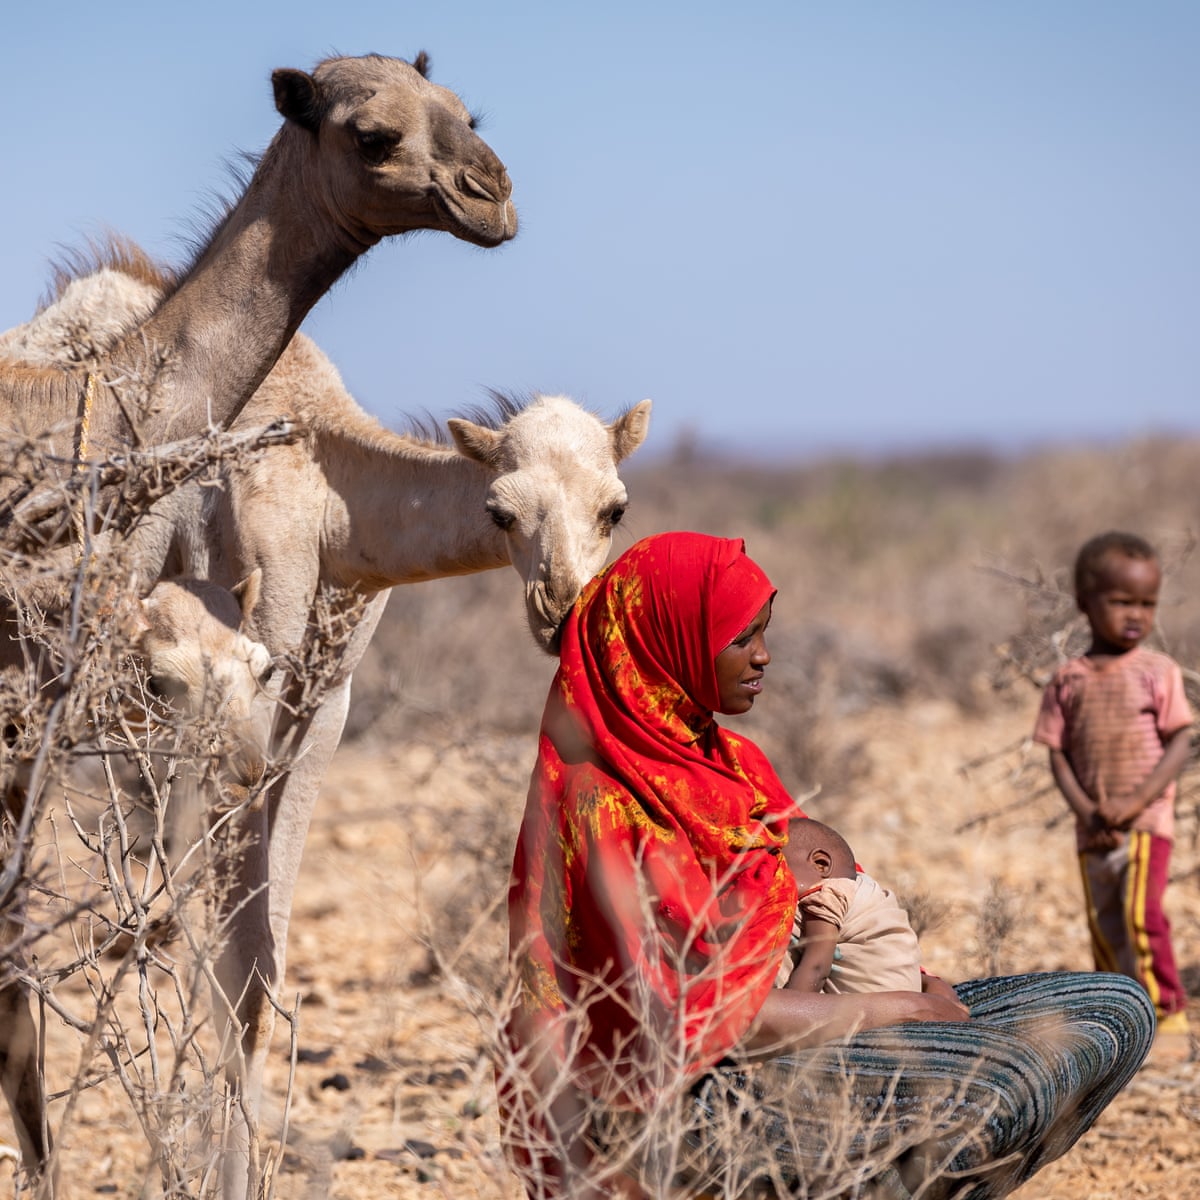 We pray for rain': Ethiopia faces catastrophic hunger as cattle perish in  severe drought | Hunger | The Guardian